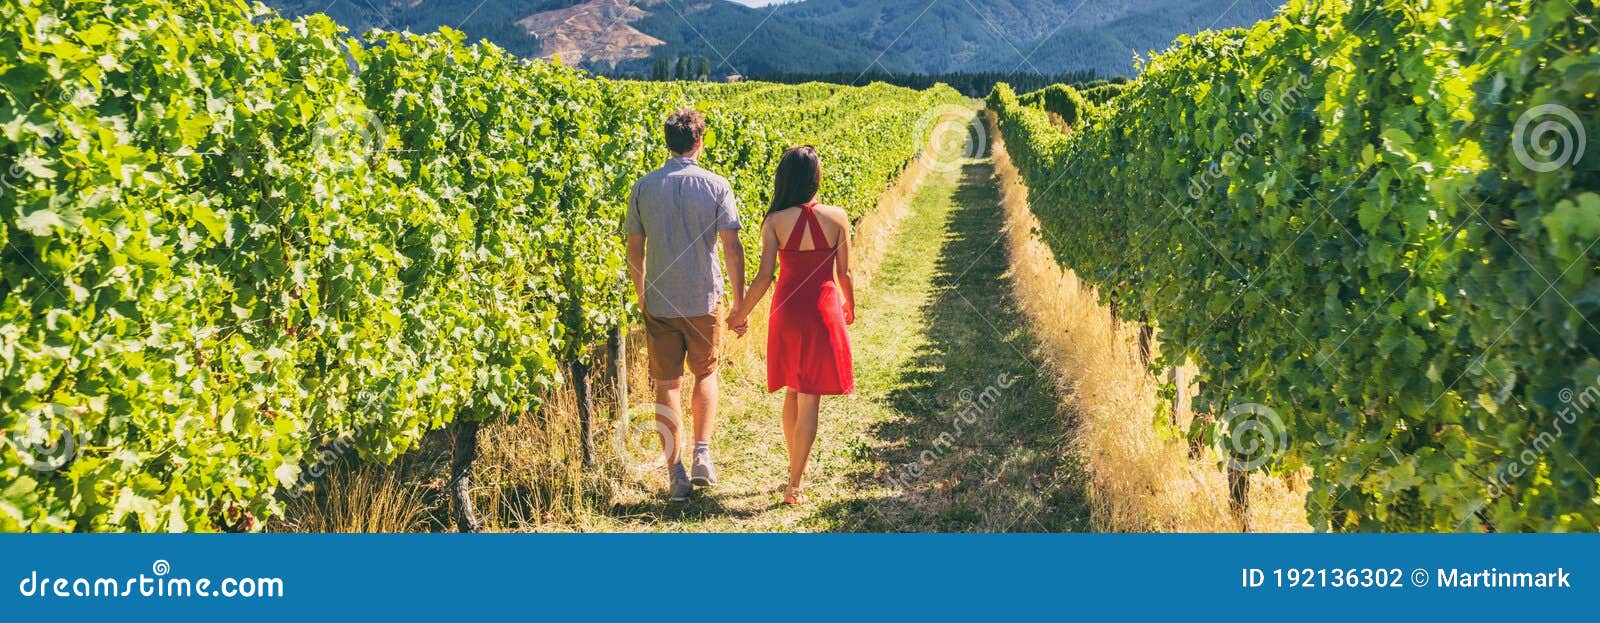 wine tour for couples